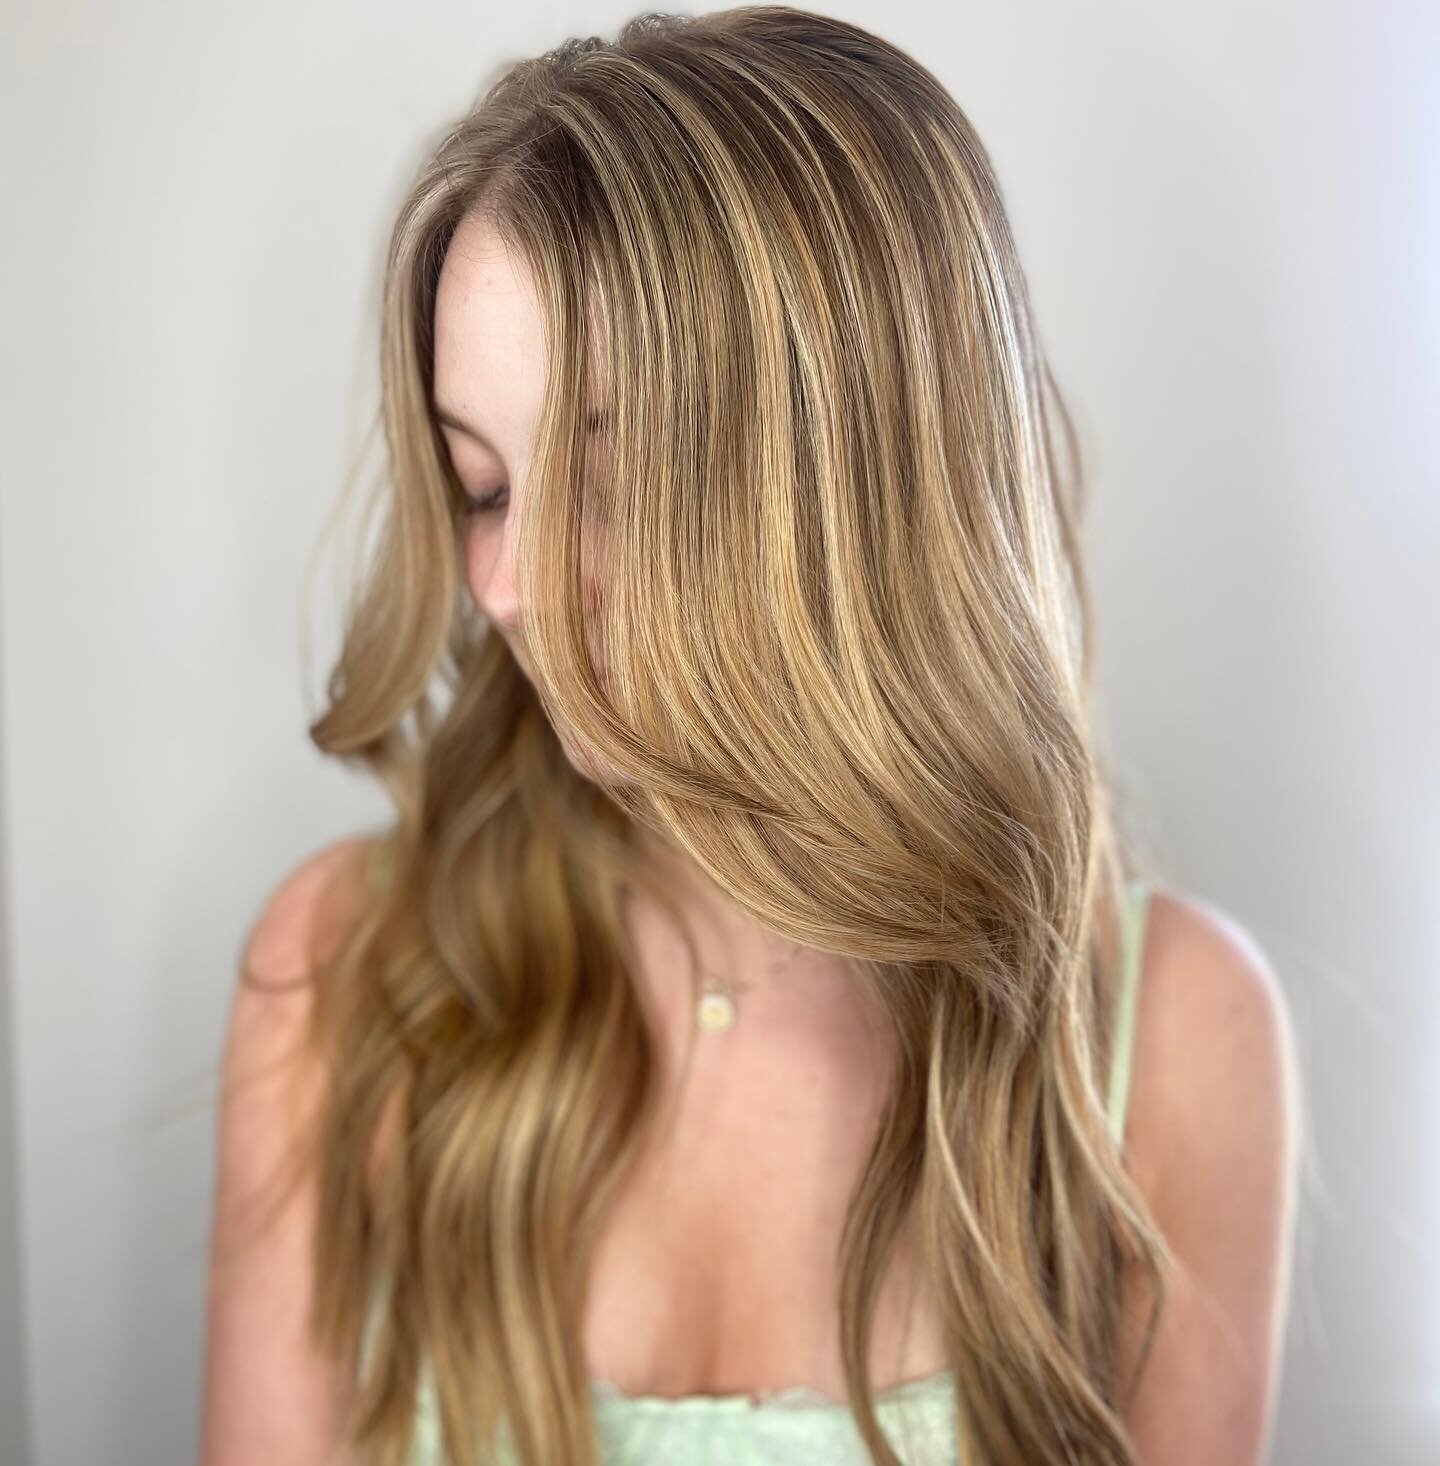 Spring has sprung and the blonding has begun! ☀️

@emily.artistrysalonsouth is now booking new clients and is ready to bring you some sunshine! 

#blondebeauty #hairstylist #franklintn #haircolor